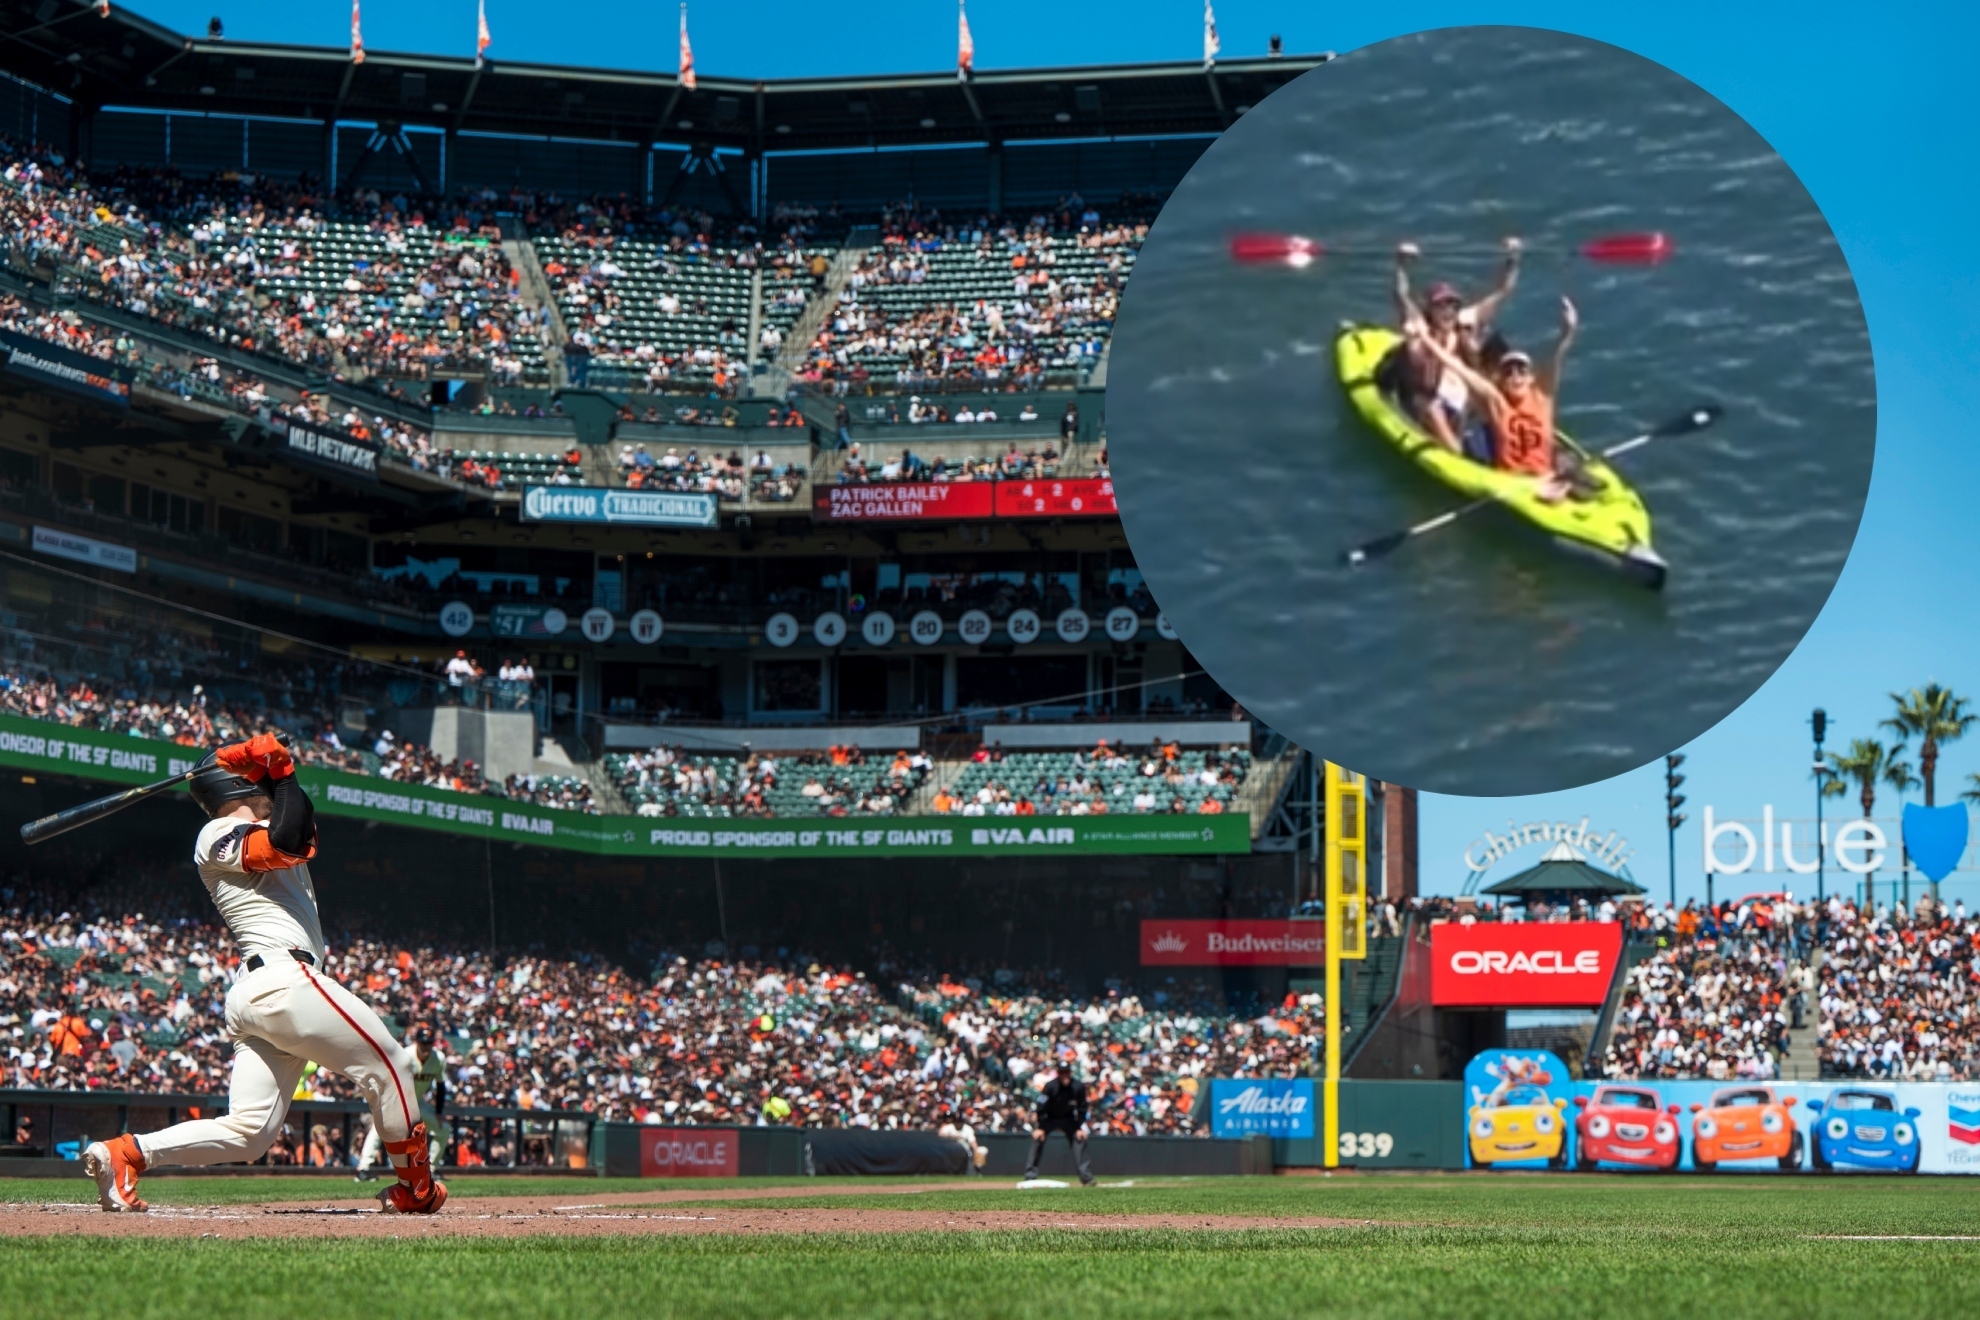 Giants hit a home run caught in a kayak sailing out of the stadium